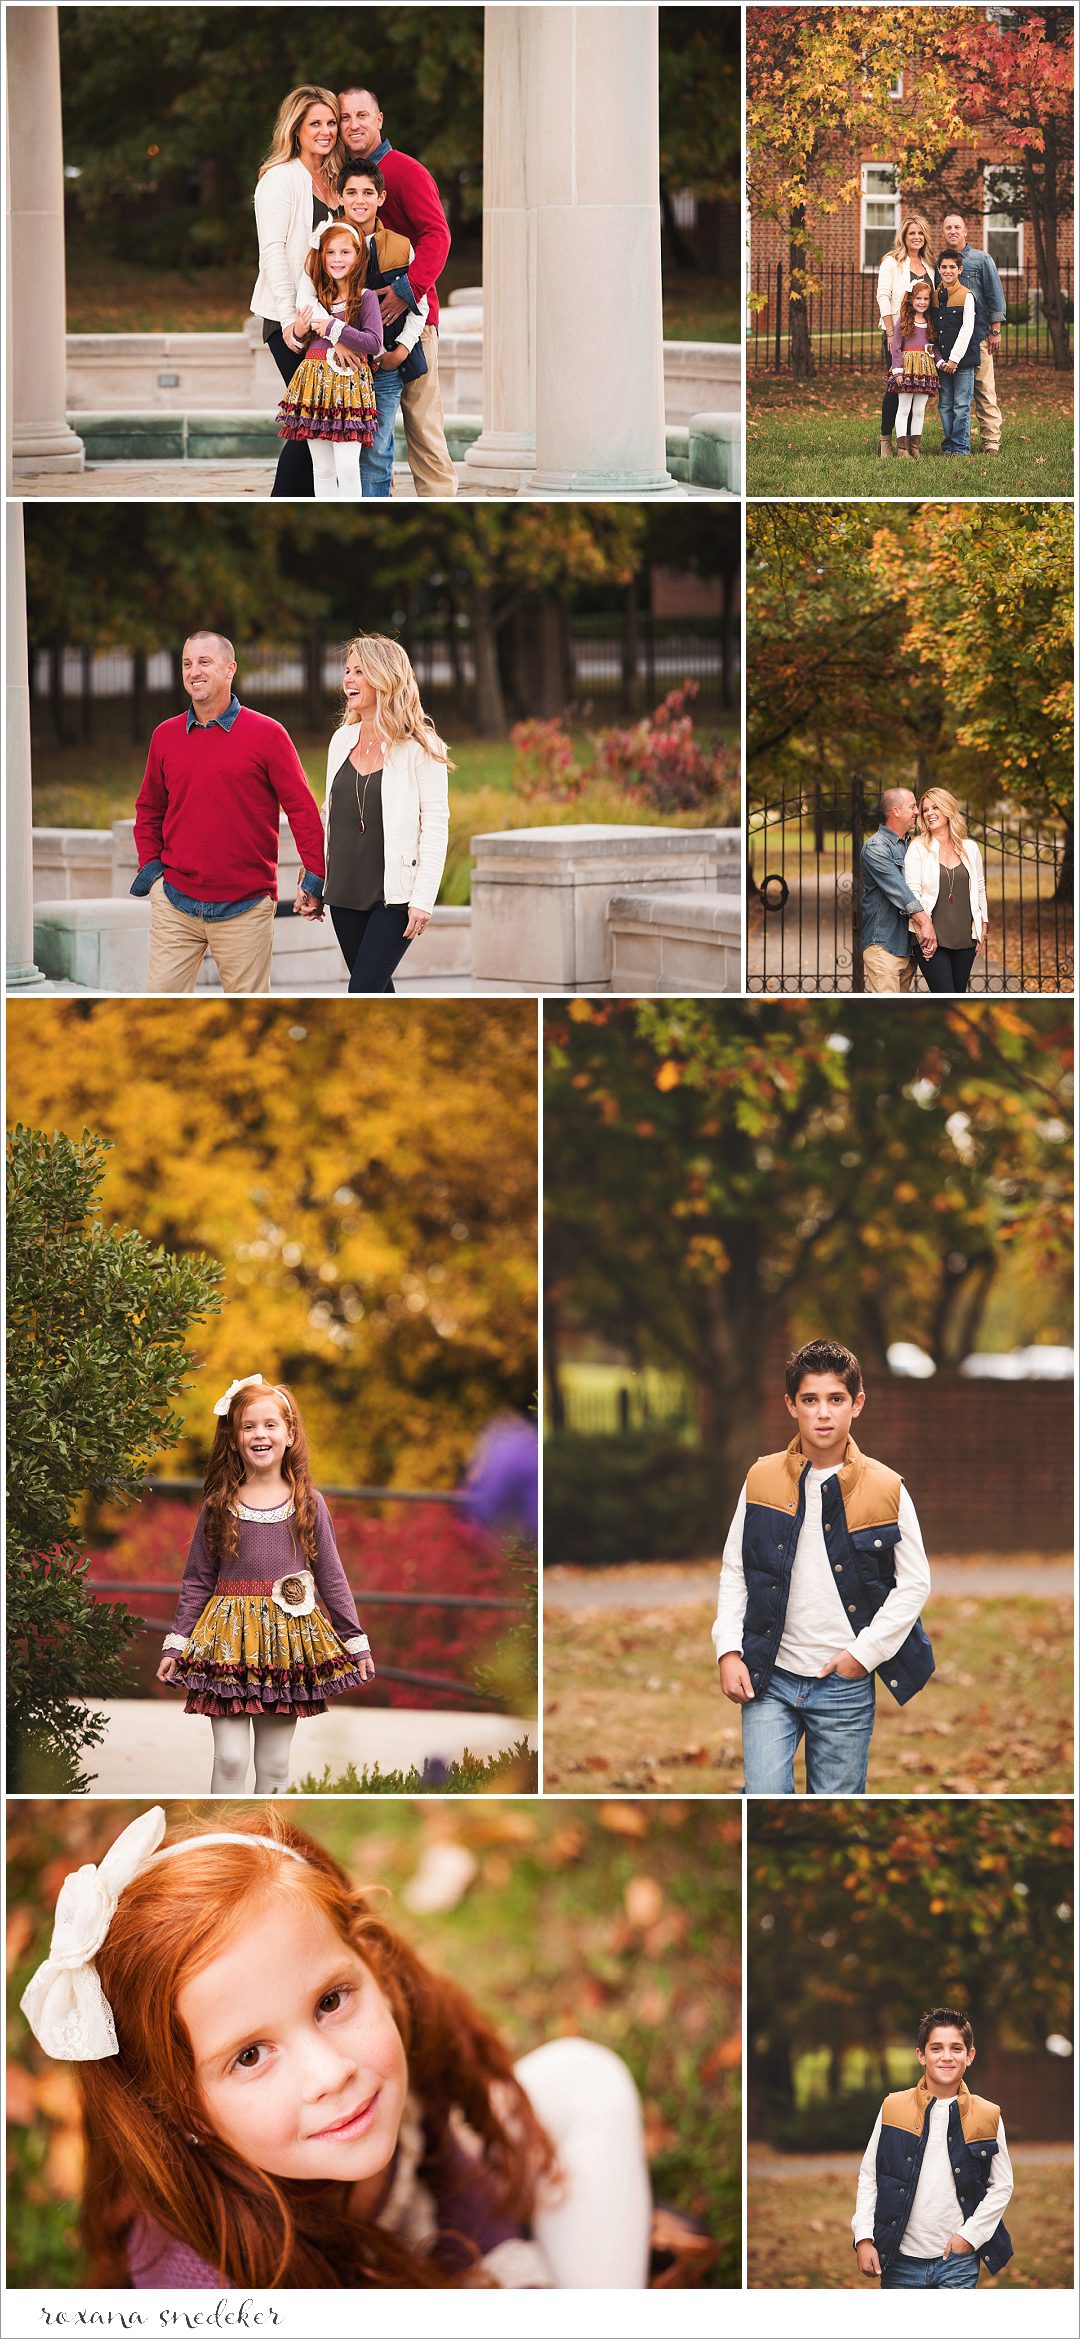 Family Photos at the gorgeous Coxhall Gardens in Carmel, Indiana